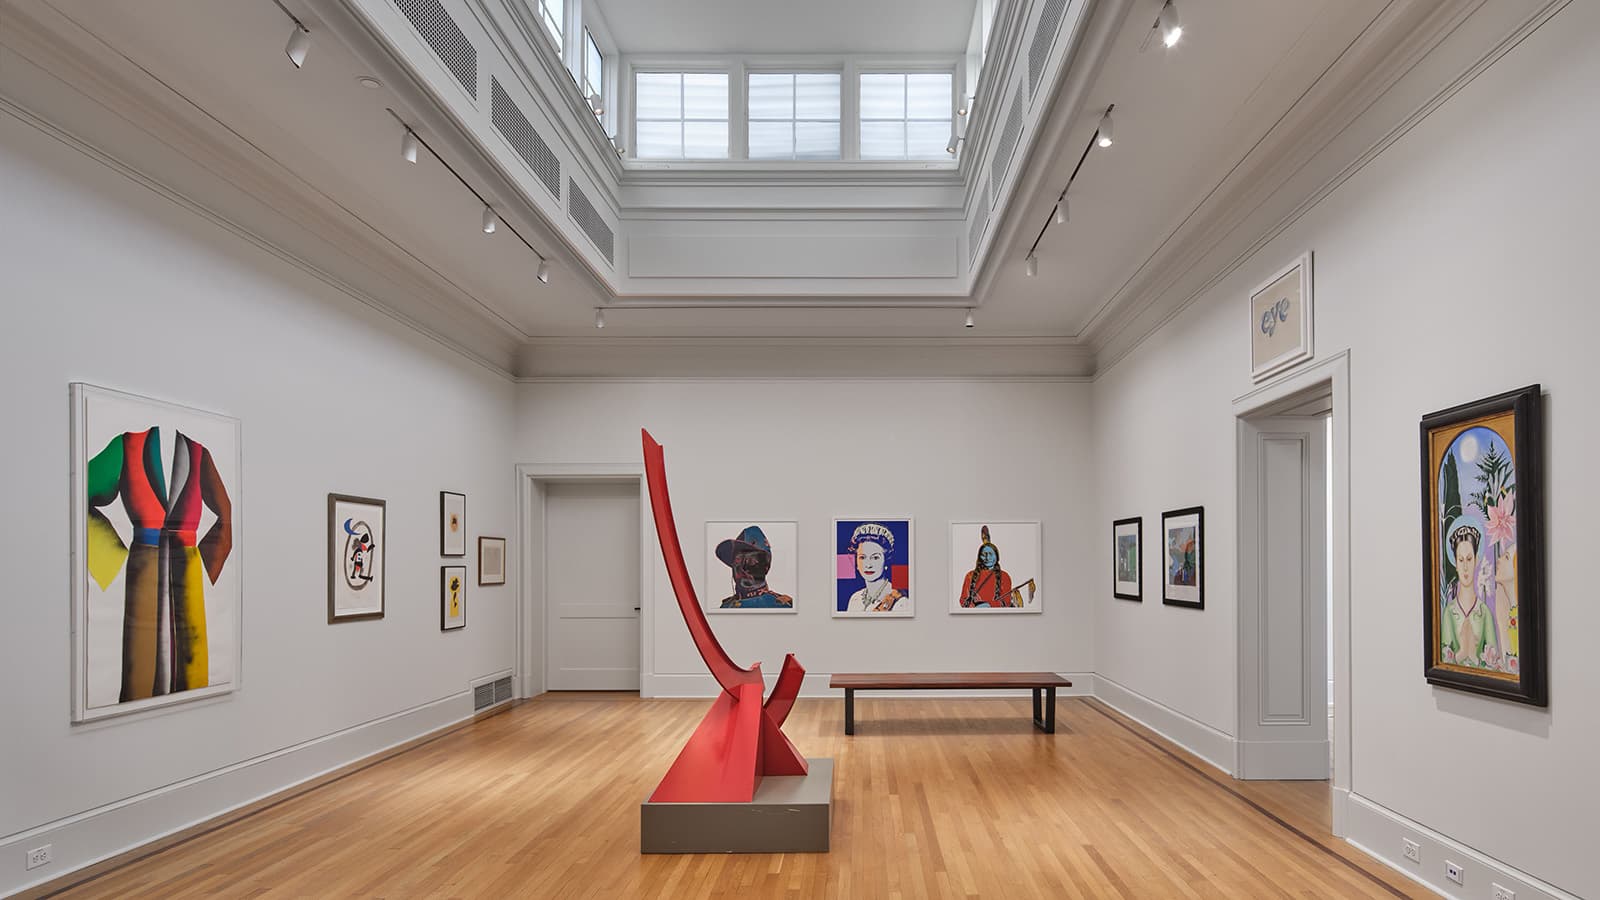 A high ceiling, well-lit gallery room with frames on the wall and red sculpture in the center of the room